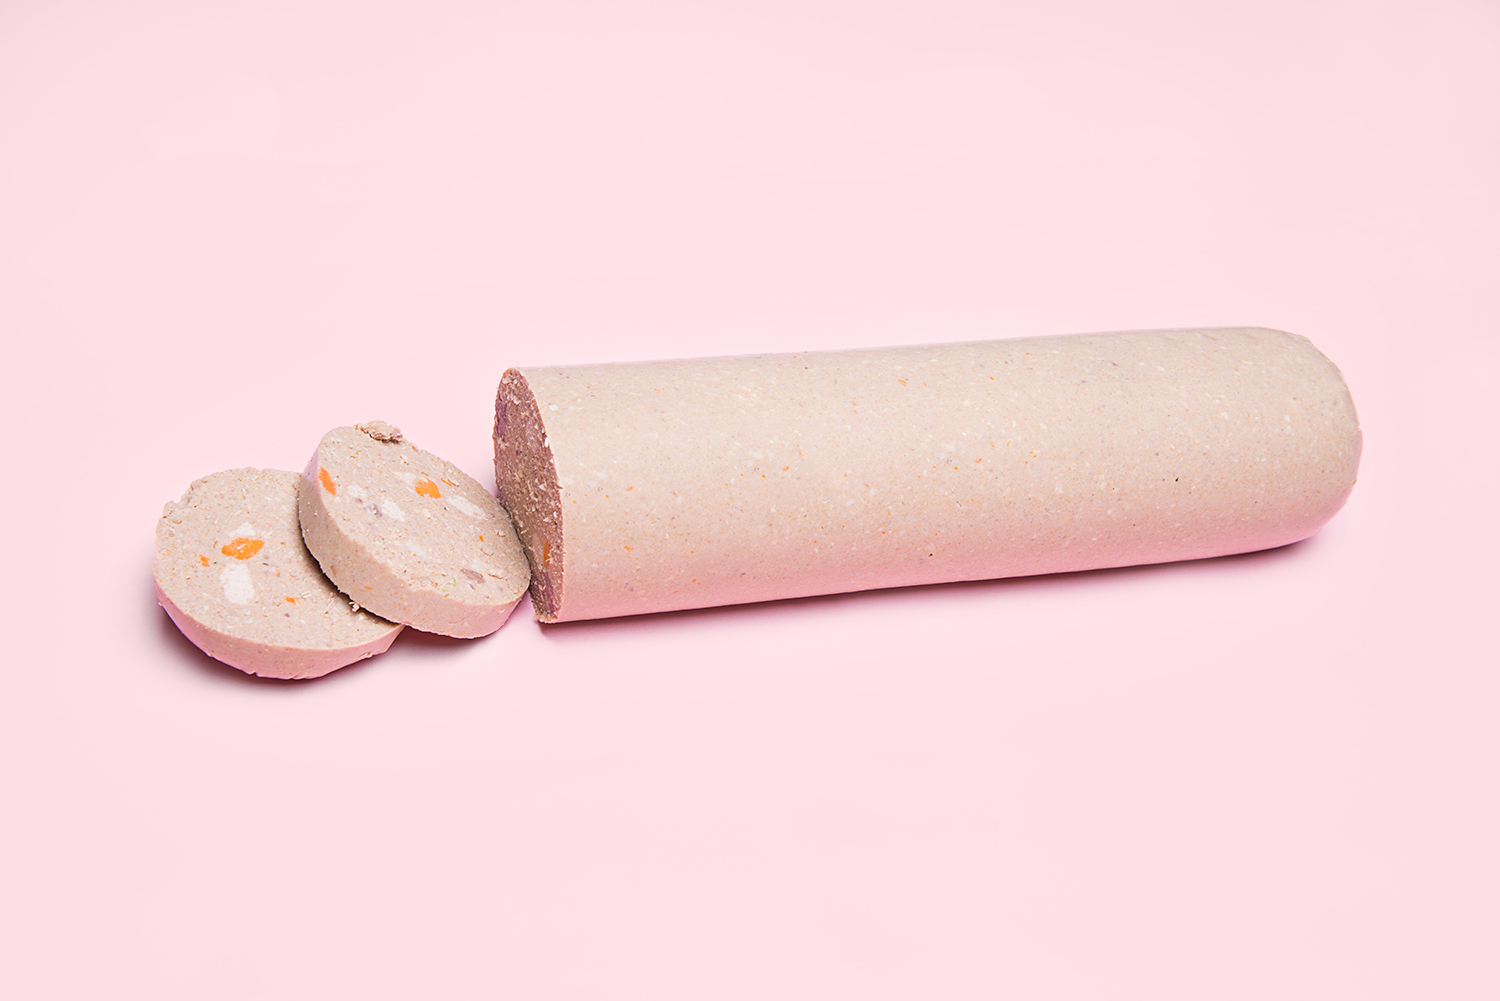 phebe schmidt candy colours photography fashion pink sausage 